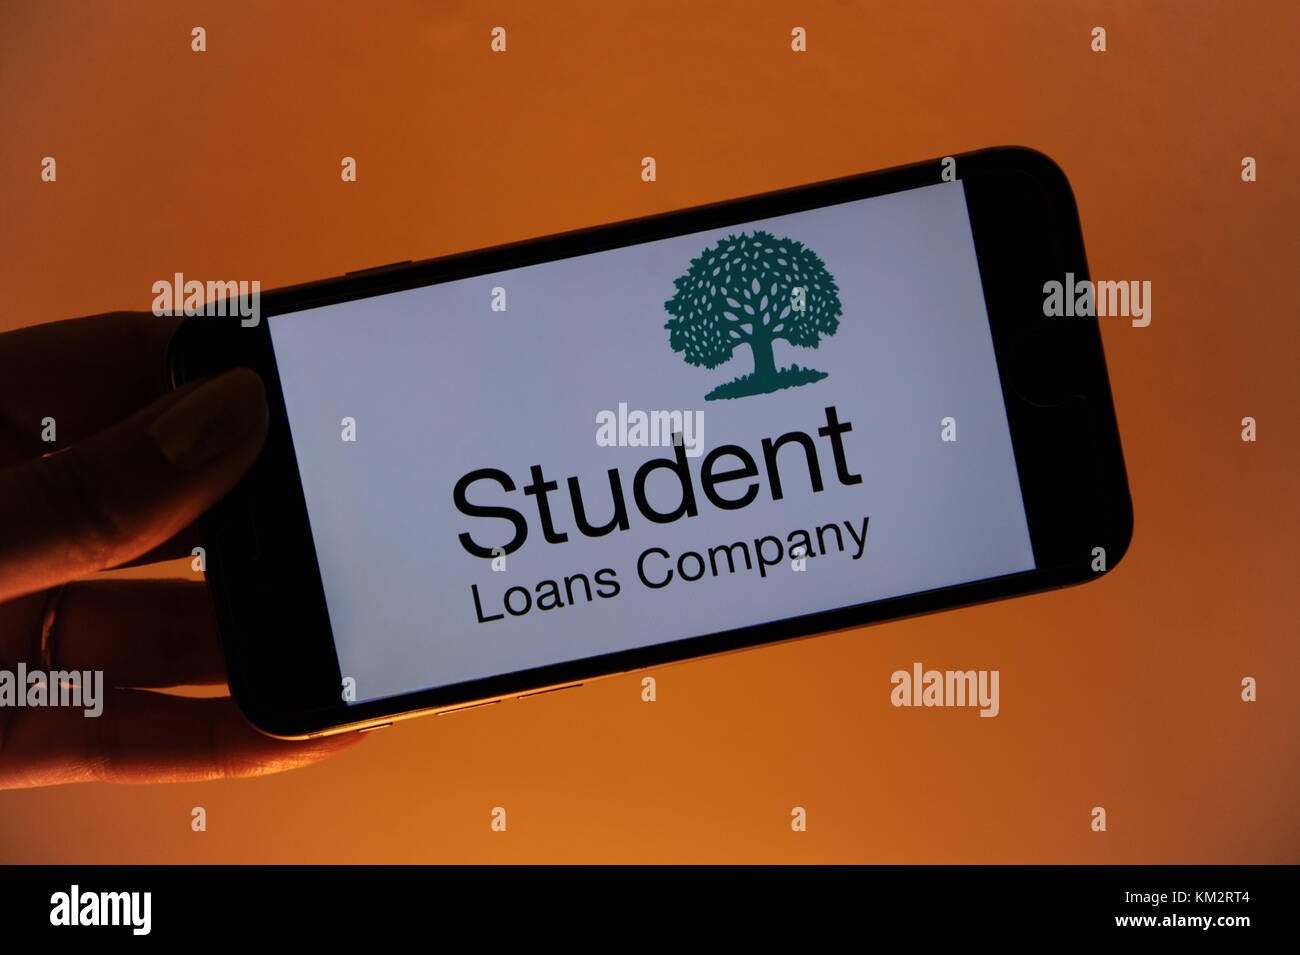 The Student Loans Company logo on a phone Stock Photo